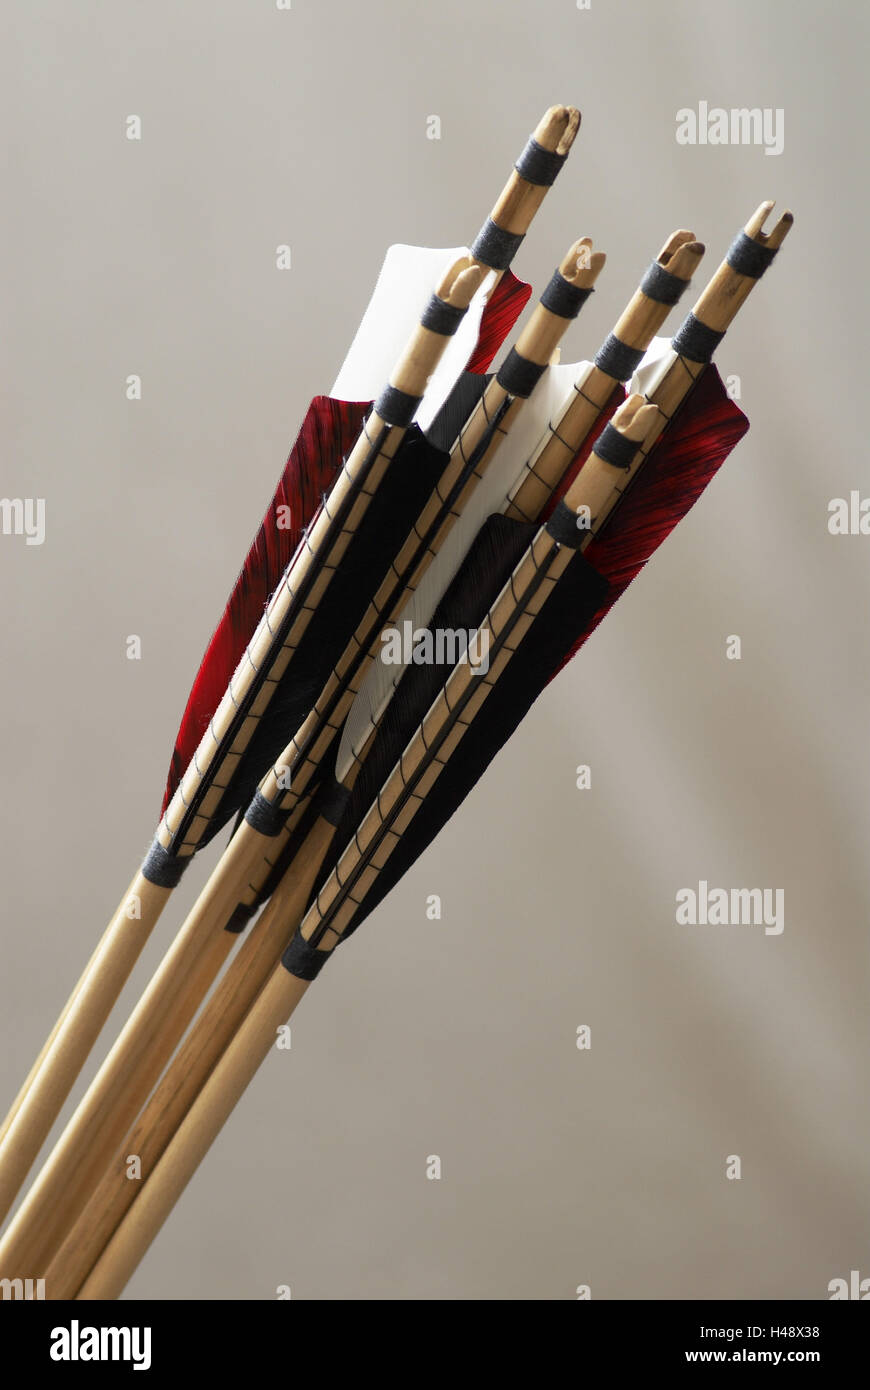 Arrows, floor, shaft, feathers, Nocke, tracts, quivers, many, red, white, black, Stock Photo